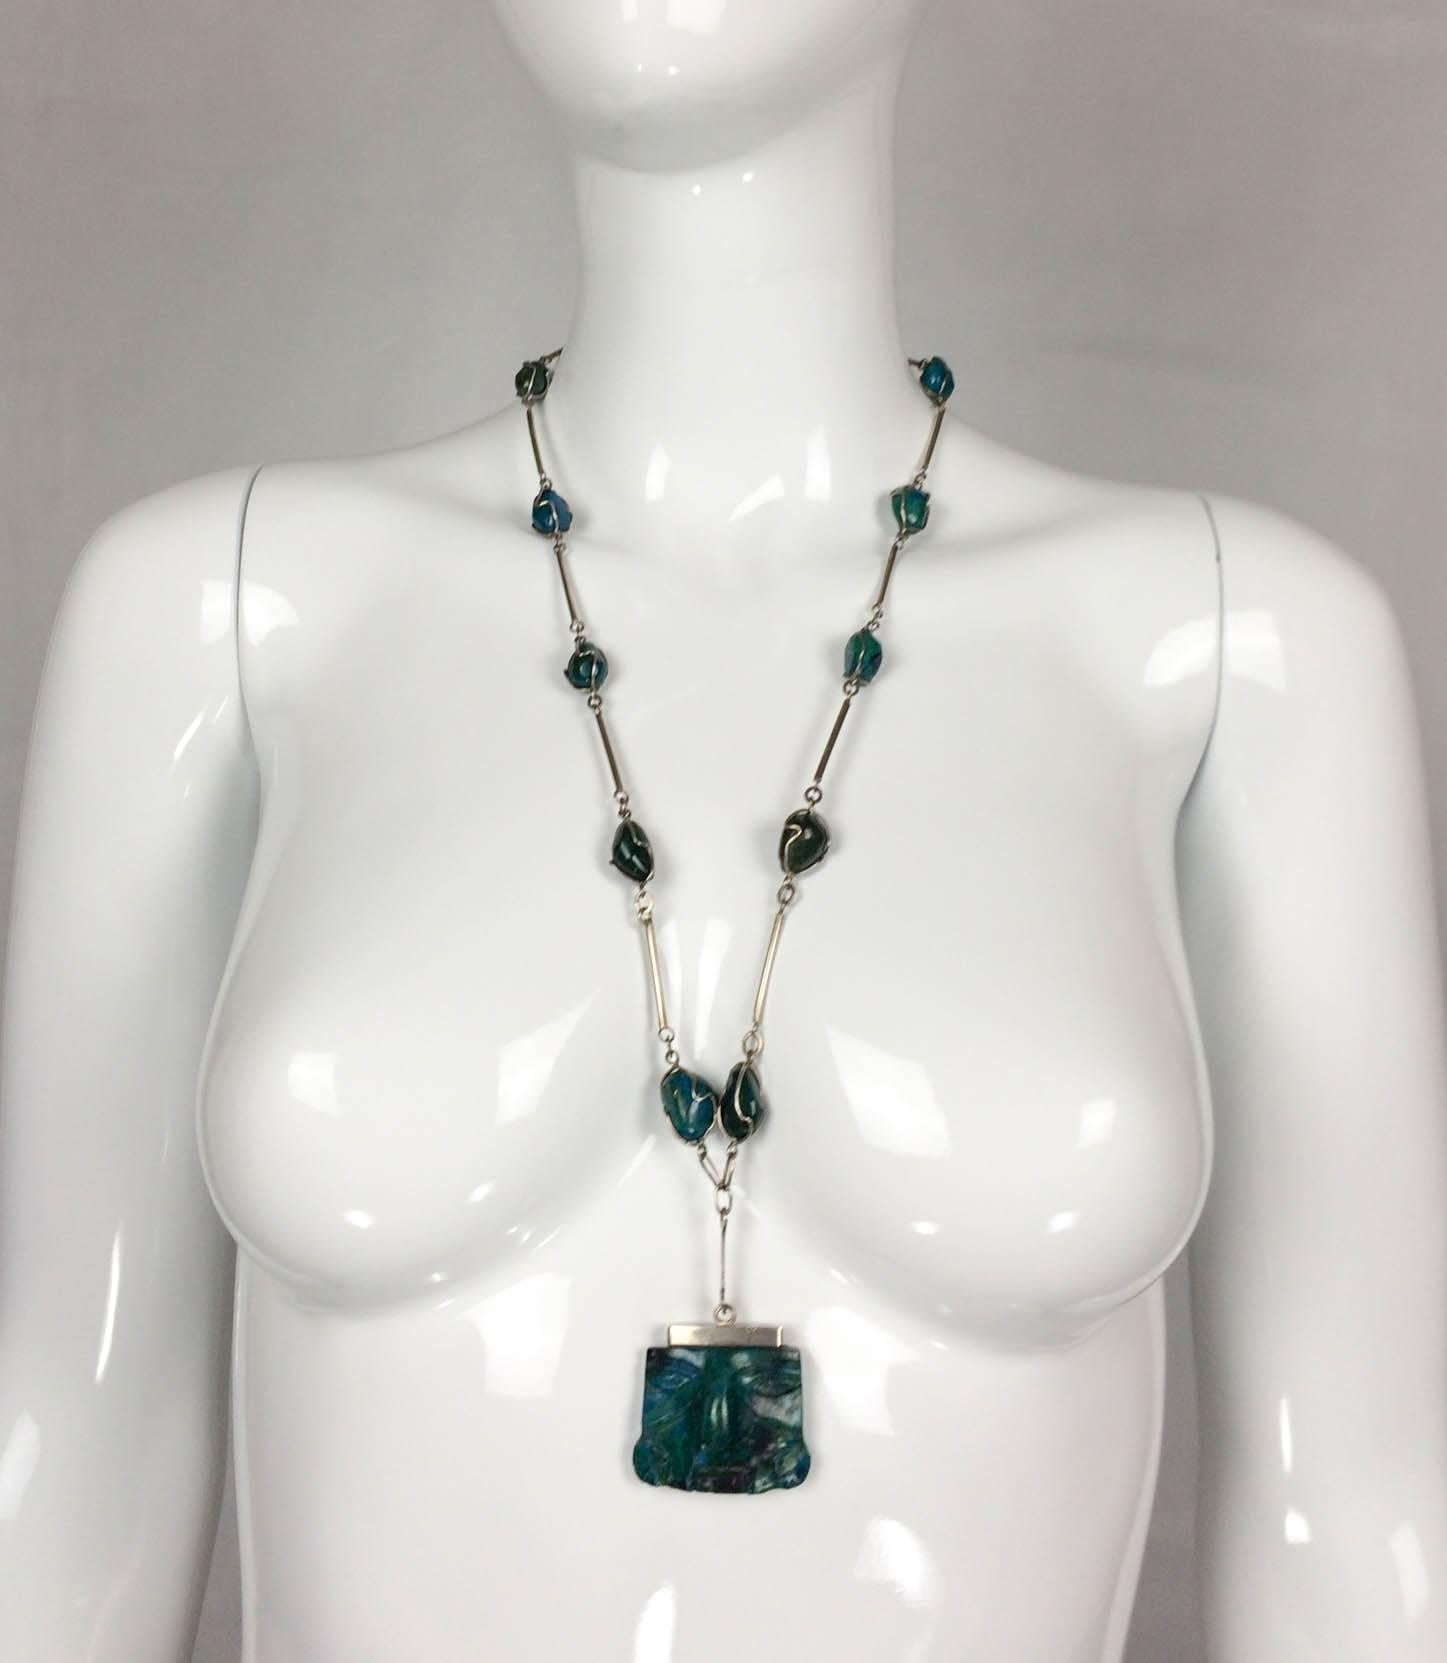 Very stylish Silver and Peruvian Turquoise Necklace. This piece is from South America from around the 1970s. The pendant is carved, featuring a face in Andes style. Great design!

Origin: South America (Andes)

Period: 1970s

Material: Silver